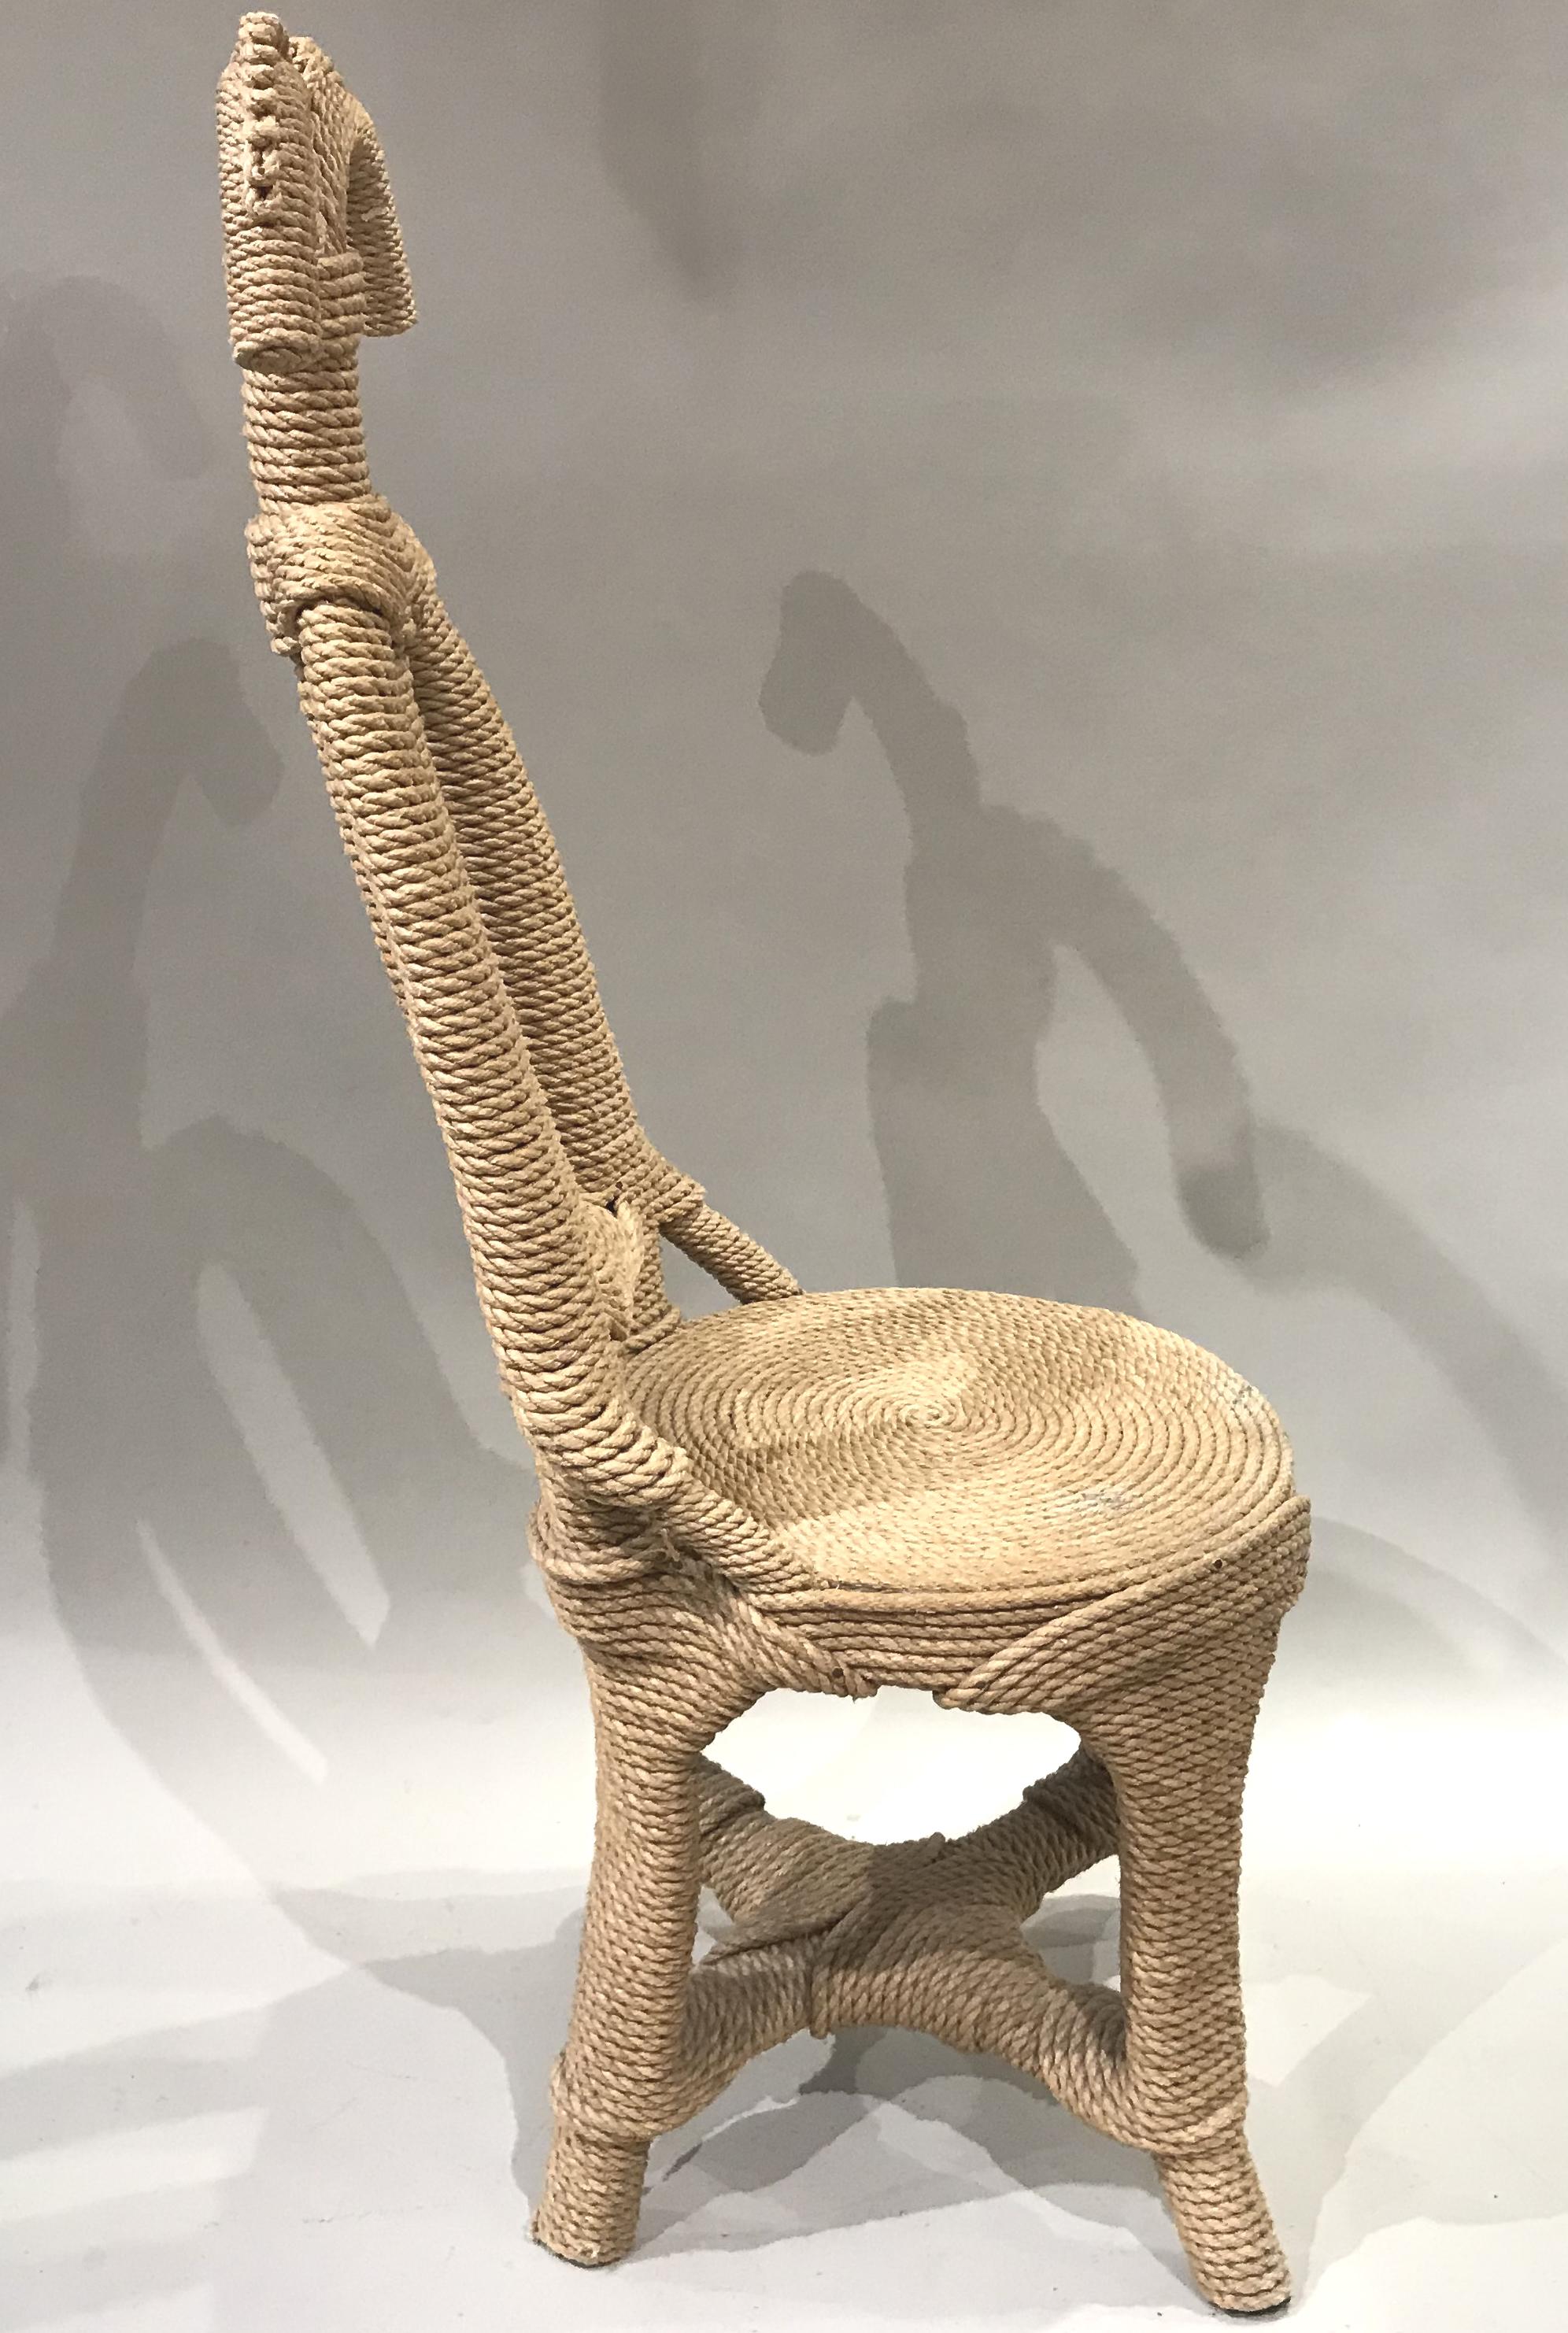 A fine Moiste MS 1003 side chair constructed with hemp rope over wood designed by Christian Astuguevieille (b. 1946). Christian Astuguevieille made a name for himself as artistic director of perfume and fashion houses; Molinard, Rochas, Nina Ricci